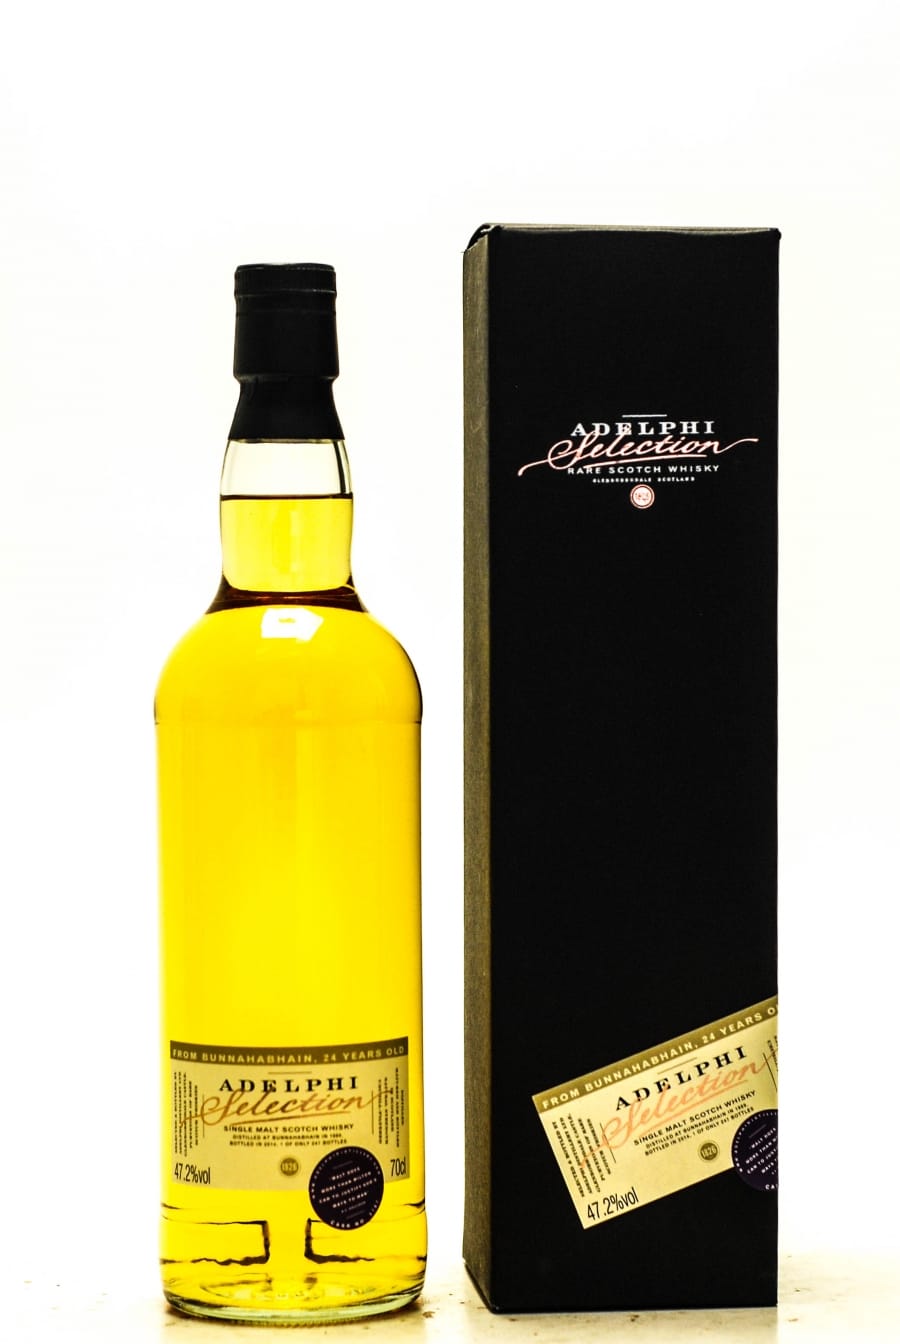 Bunnahabhain - 24 Years Old Adelphi Selection Cask:5787 47.2% 1989 In Original Container